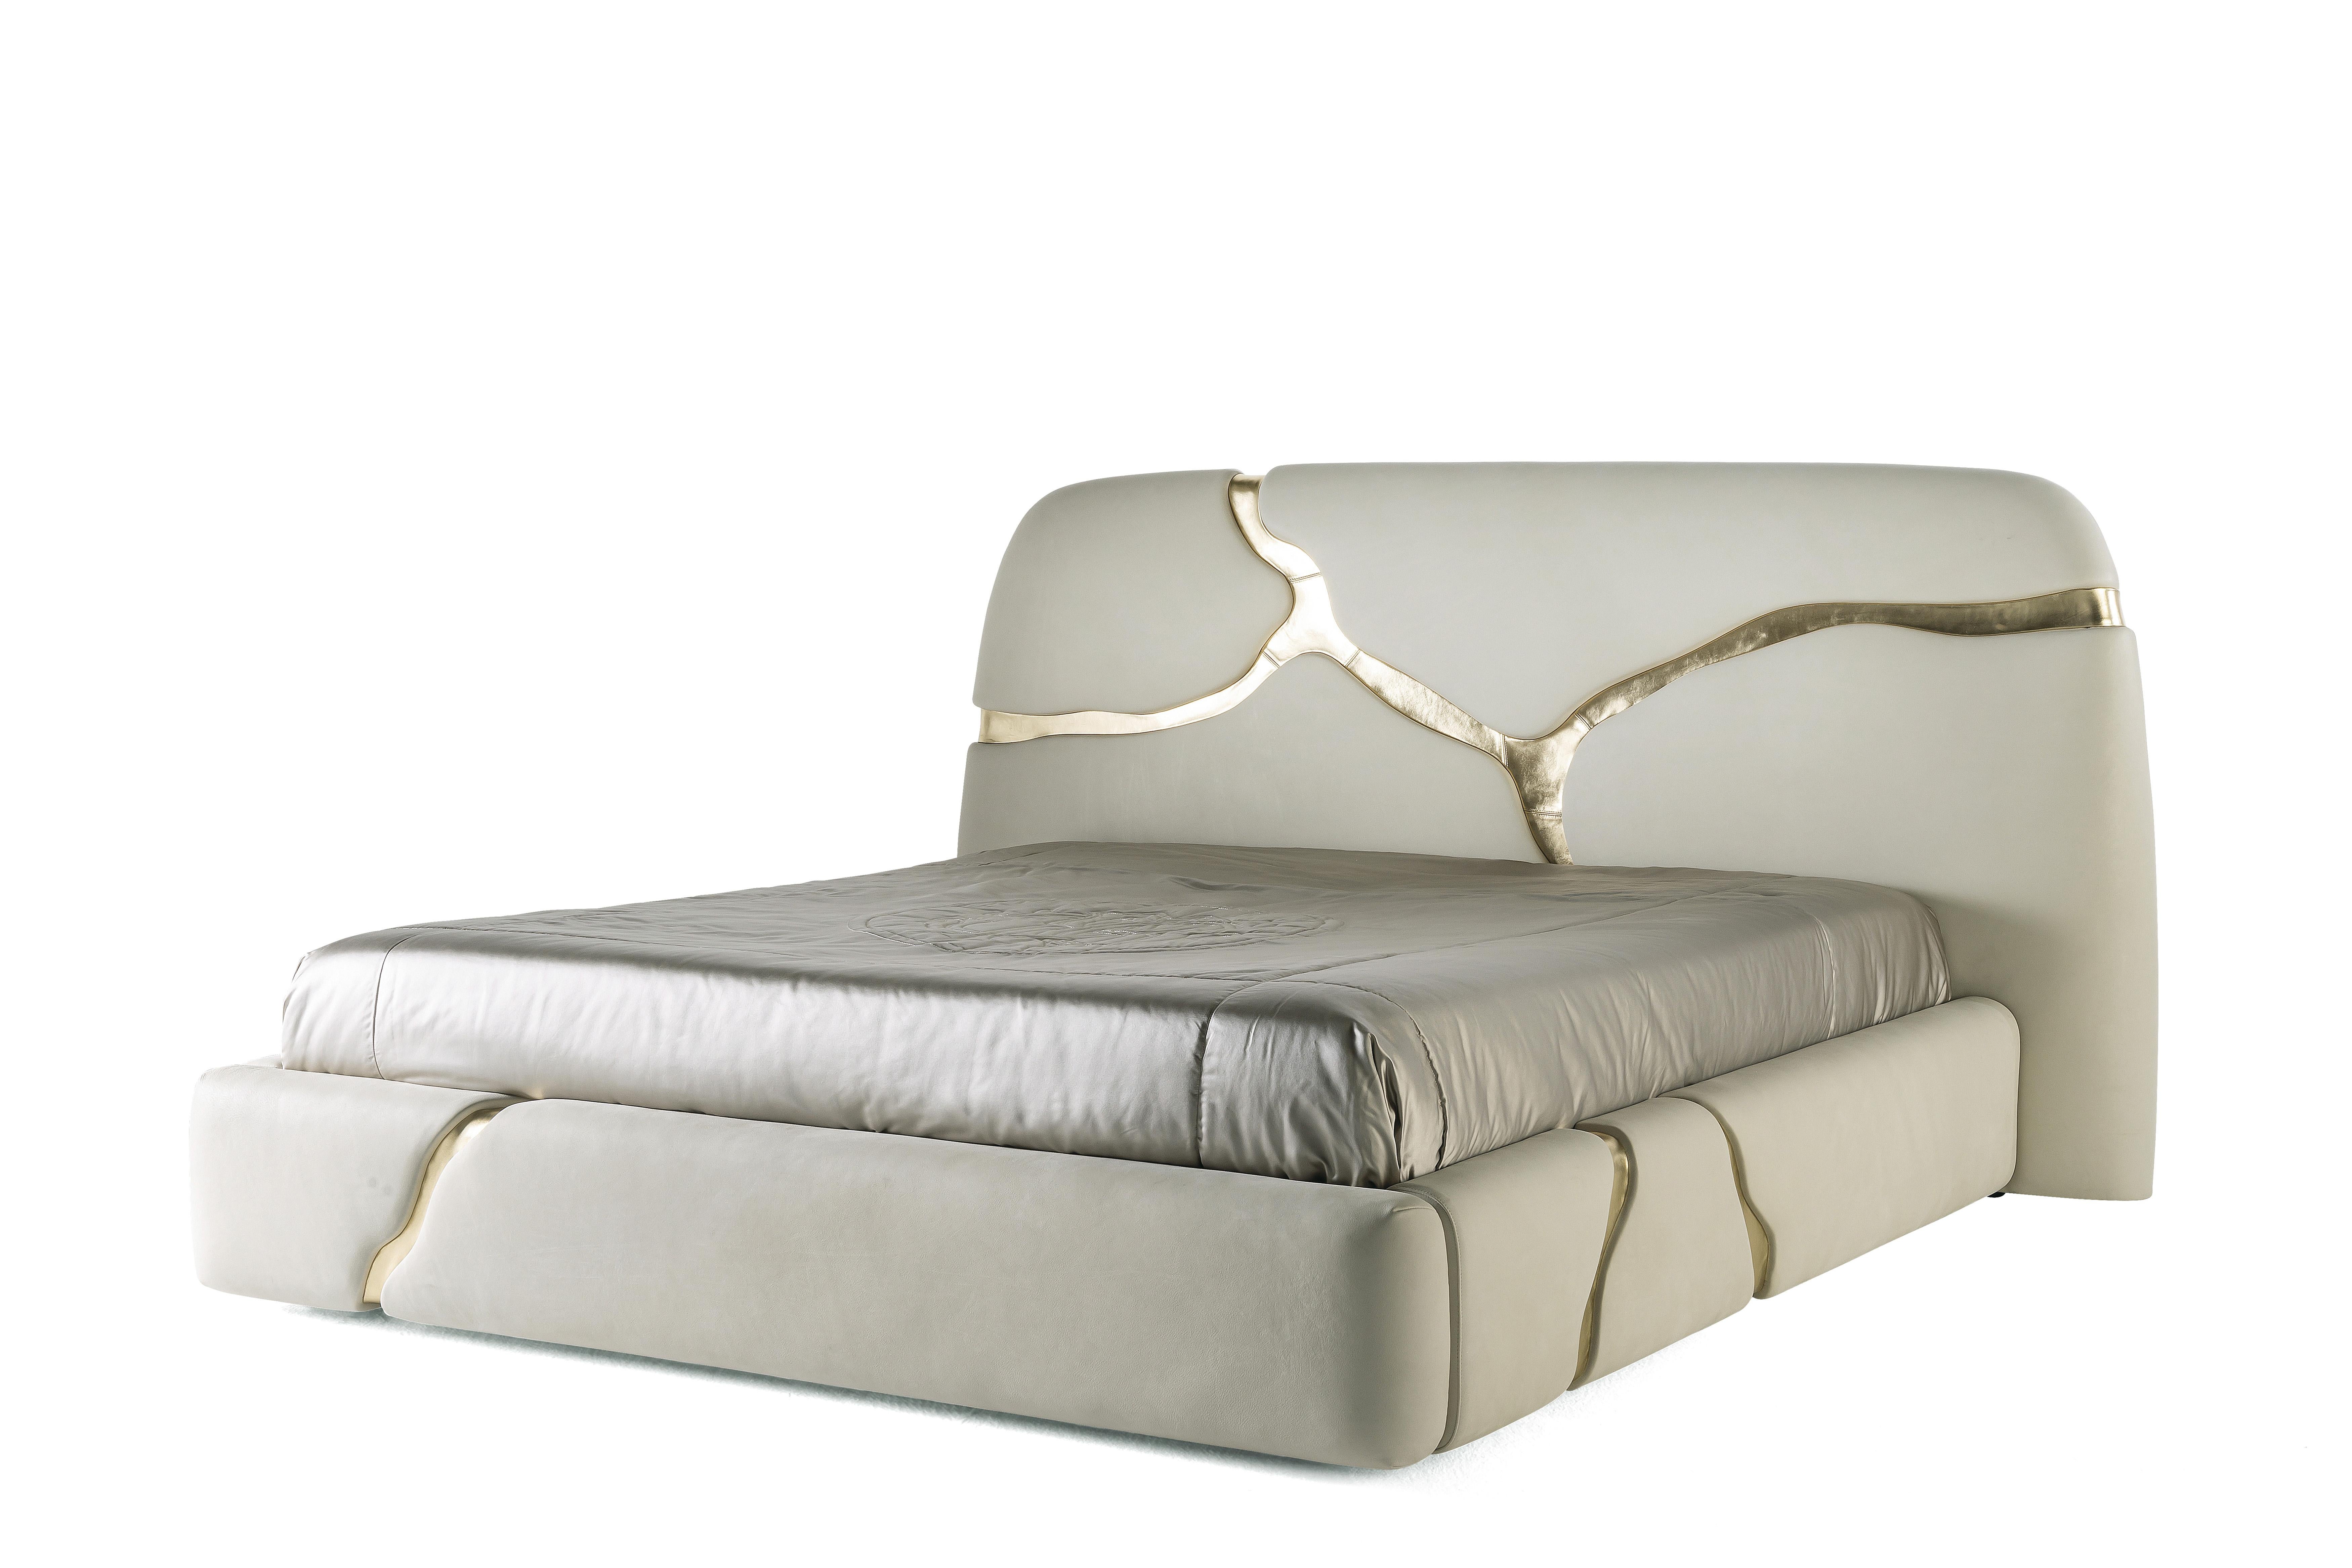 Italian 21st Century Elgon Bed in Leather by Roberto Cavalli Home Interiors For Sale